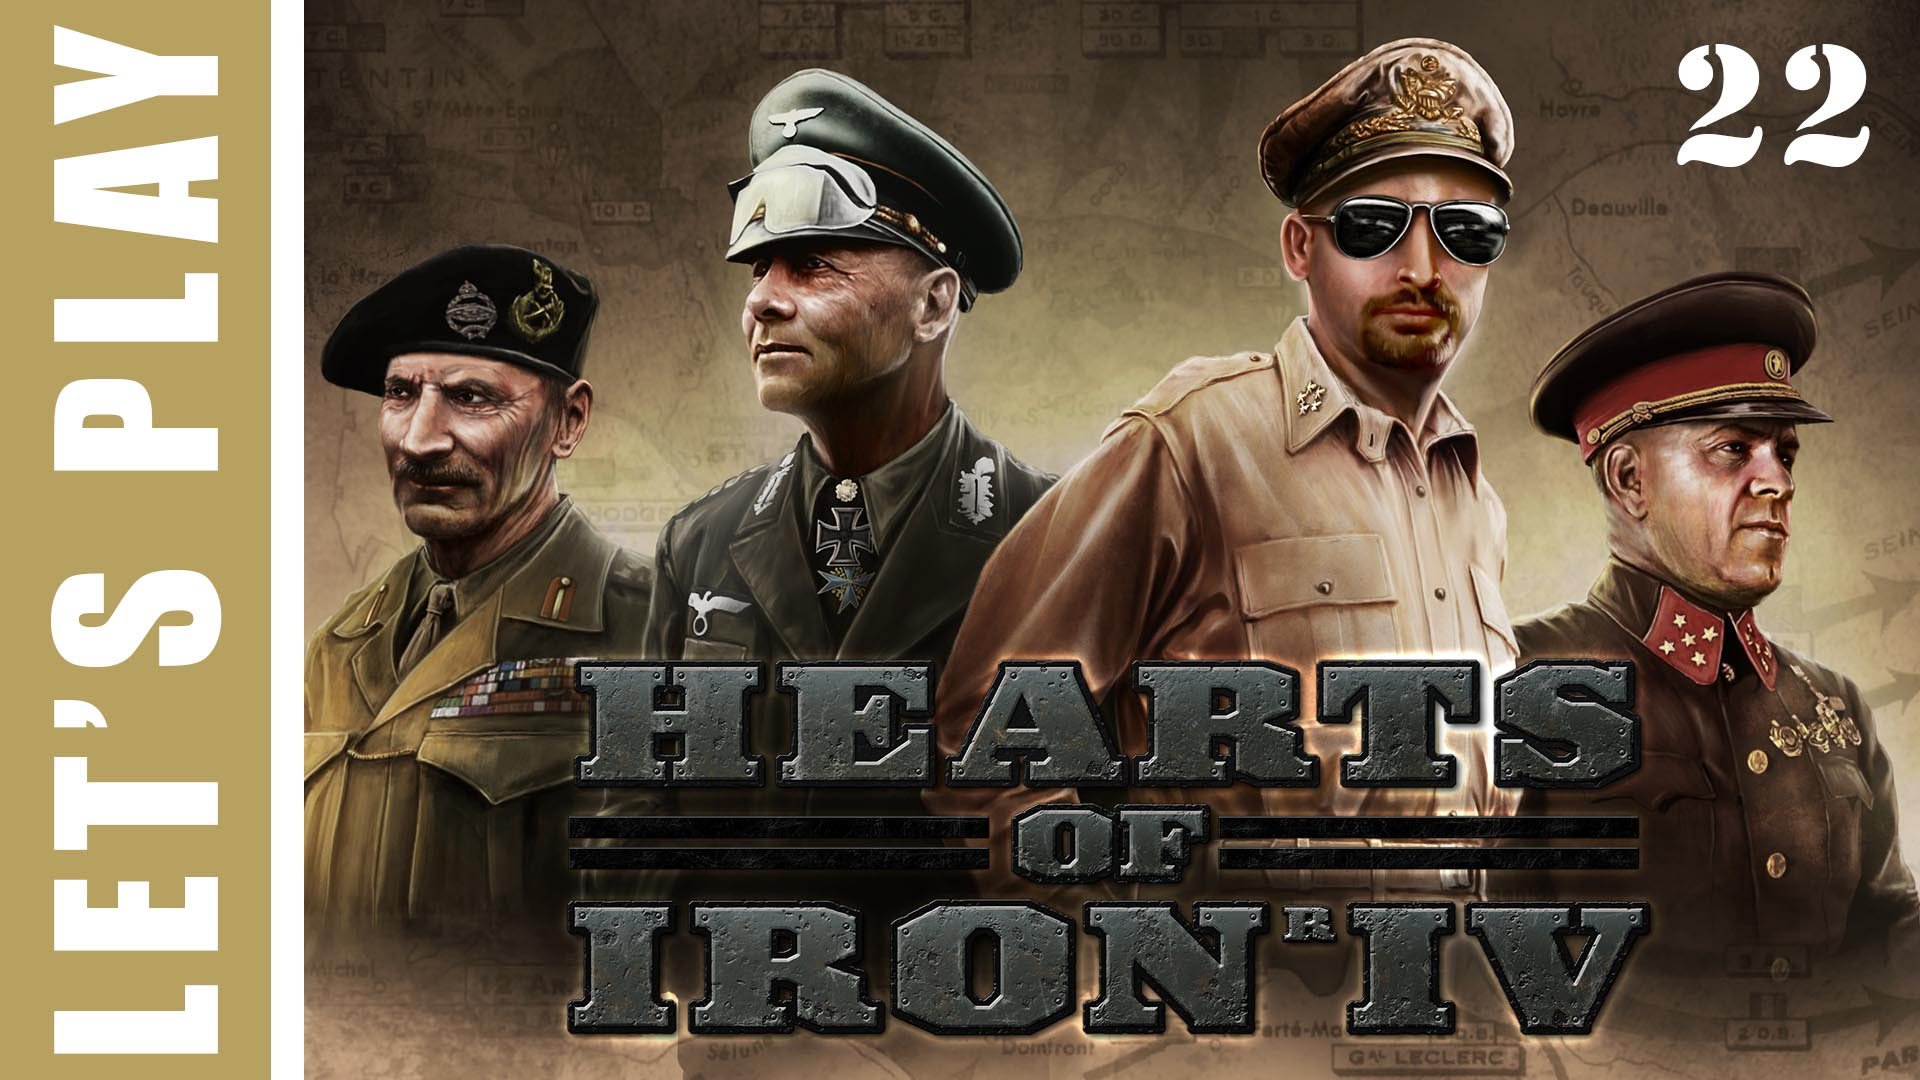 Hearts of Iron IV Germany Wins World War 2 Let’s Play 22